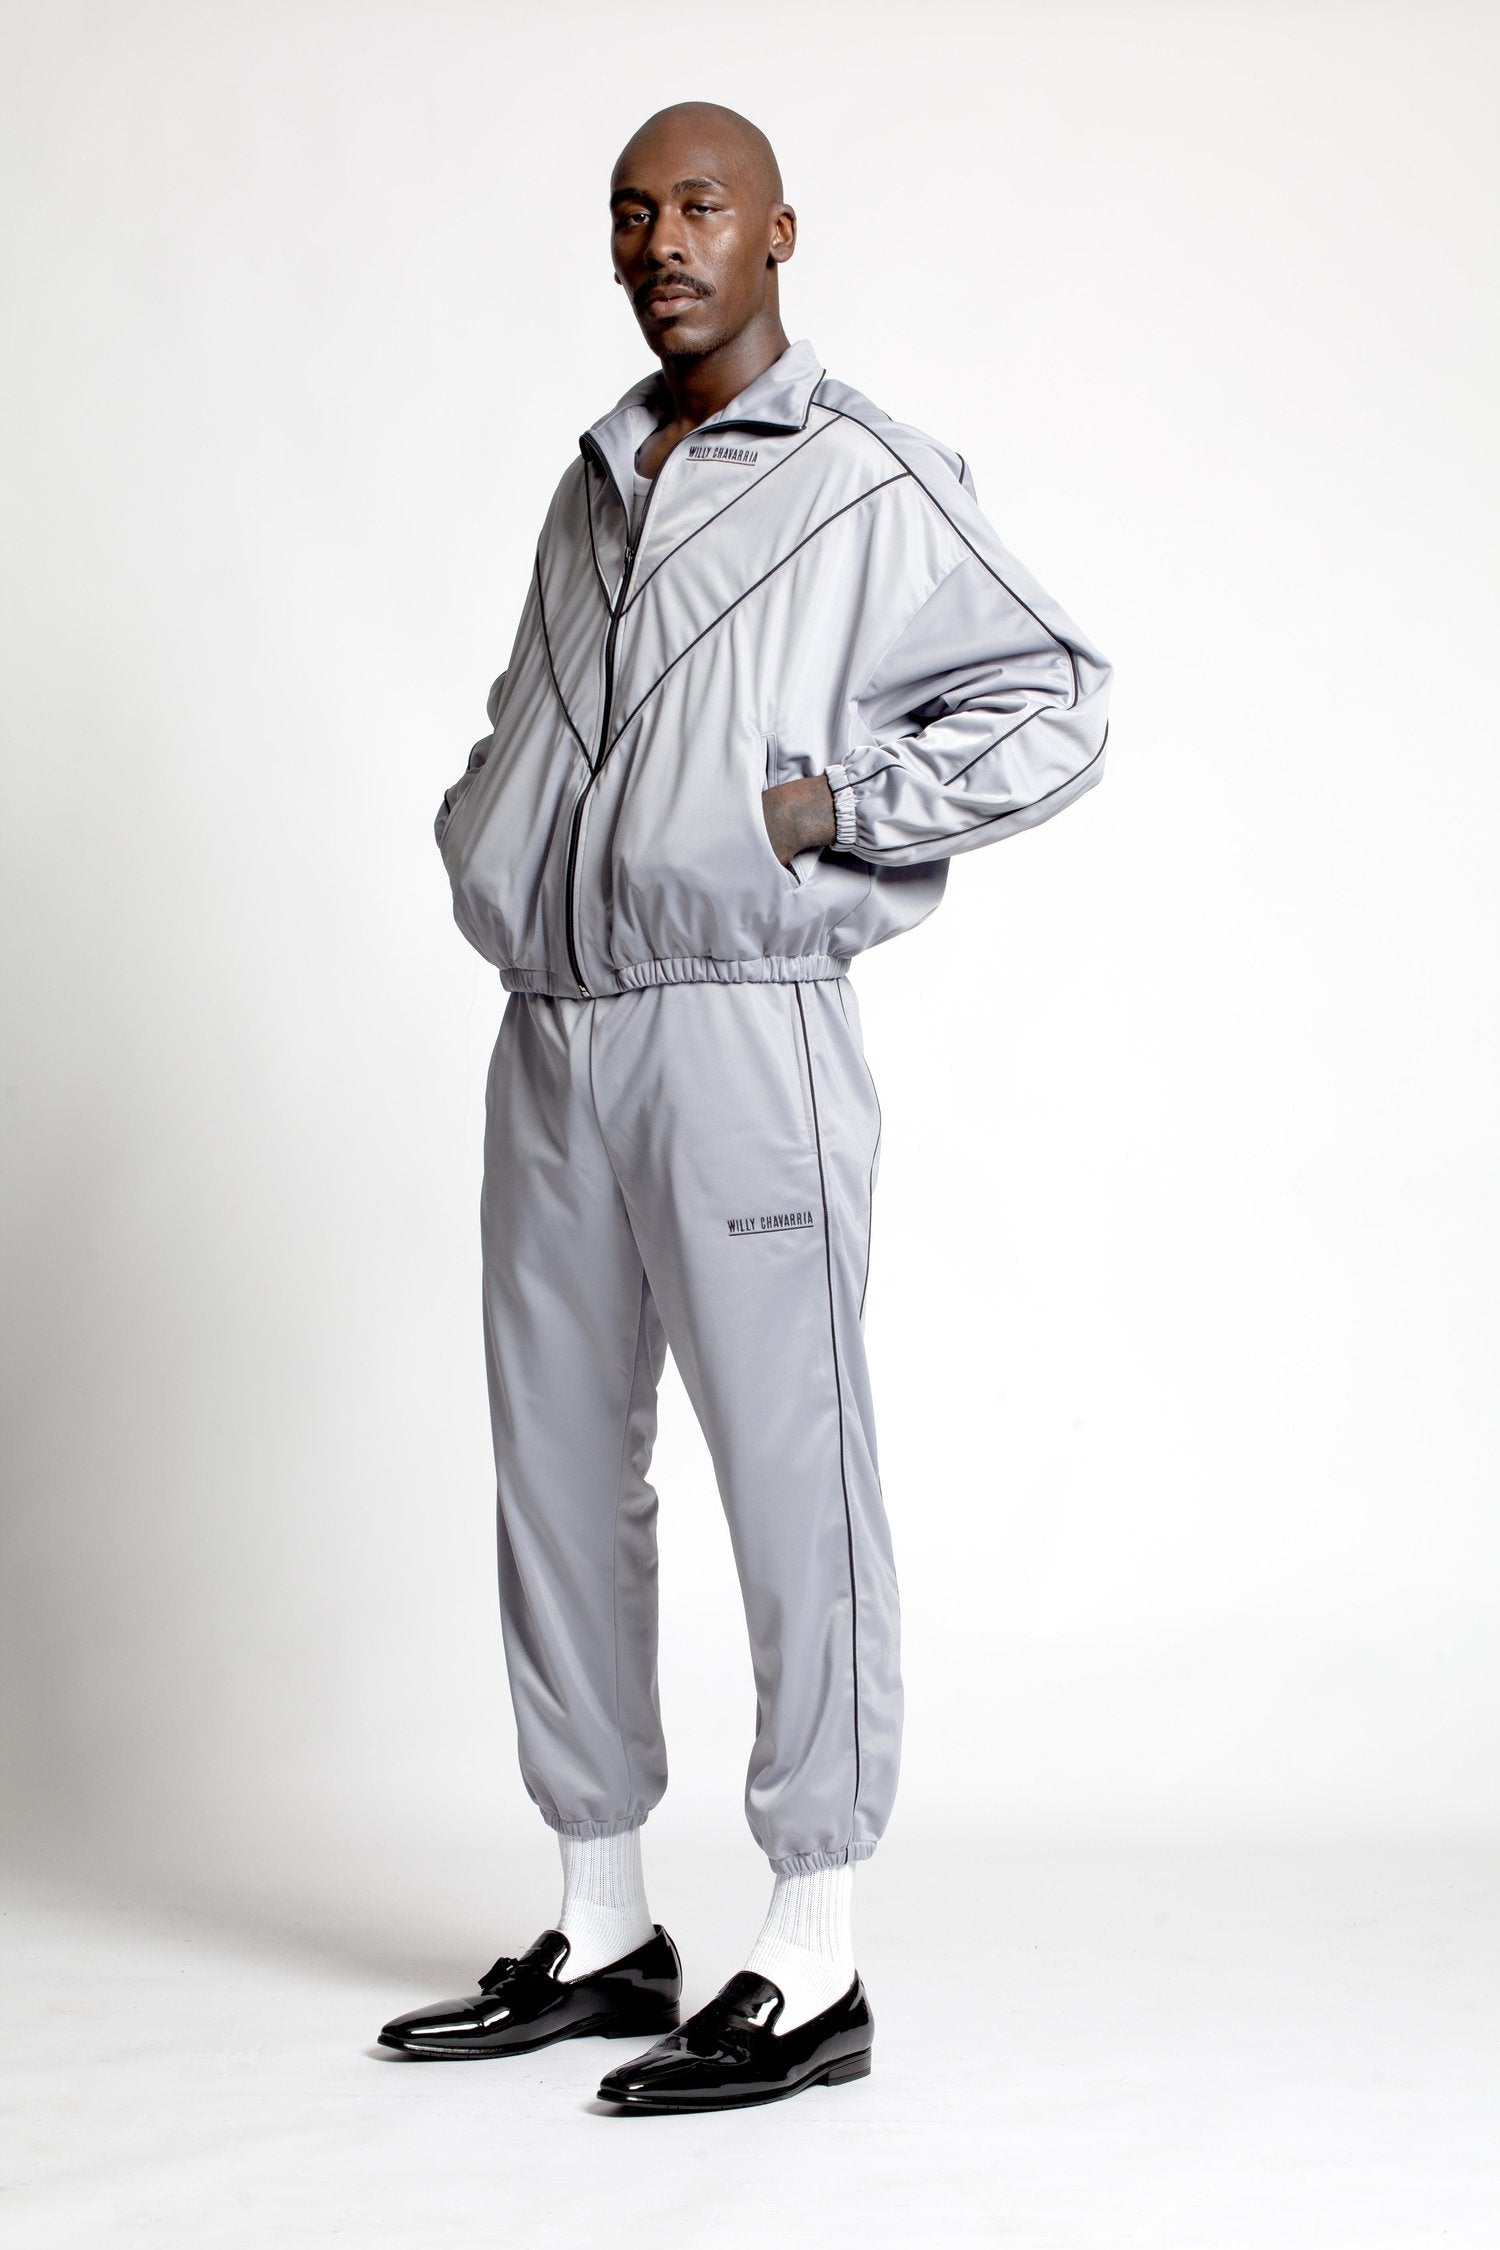 <span style="color: #f50b0b;">Last One</span> WILLY CHAVARRIA / BUFFALO TRACK PANT GREY